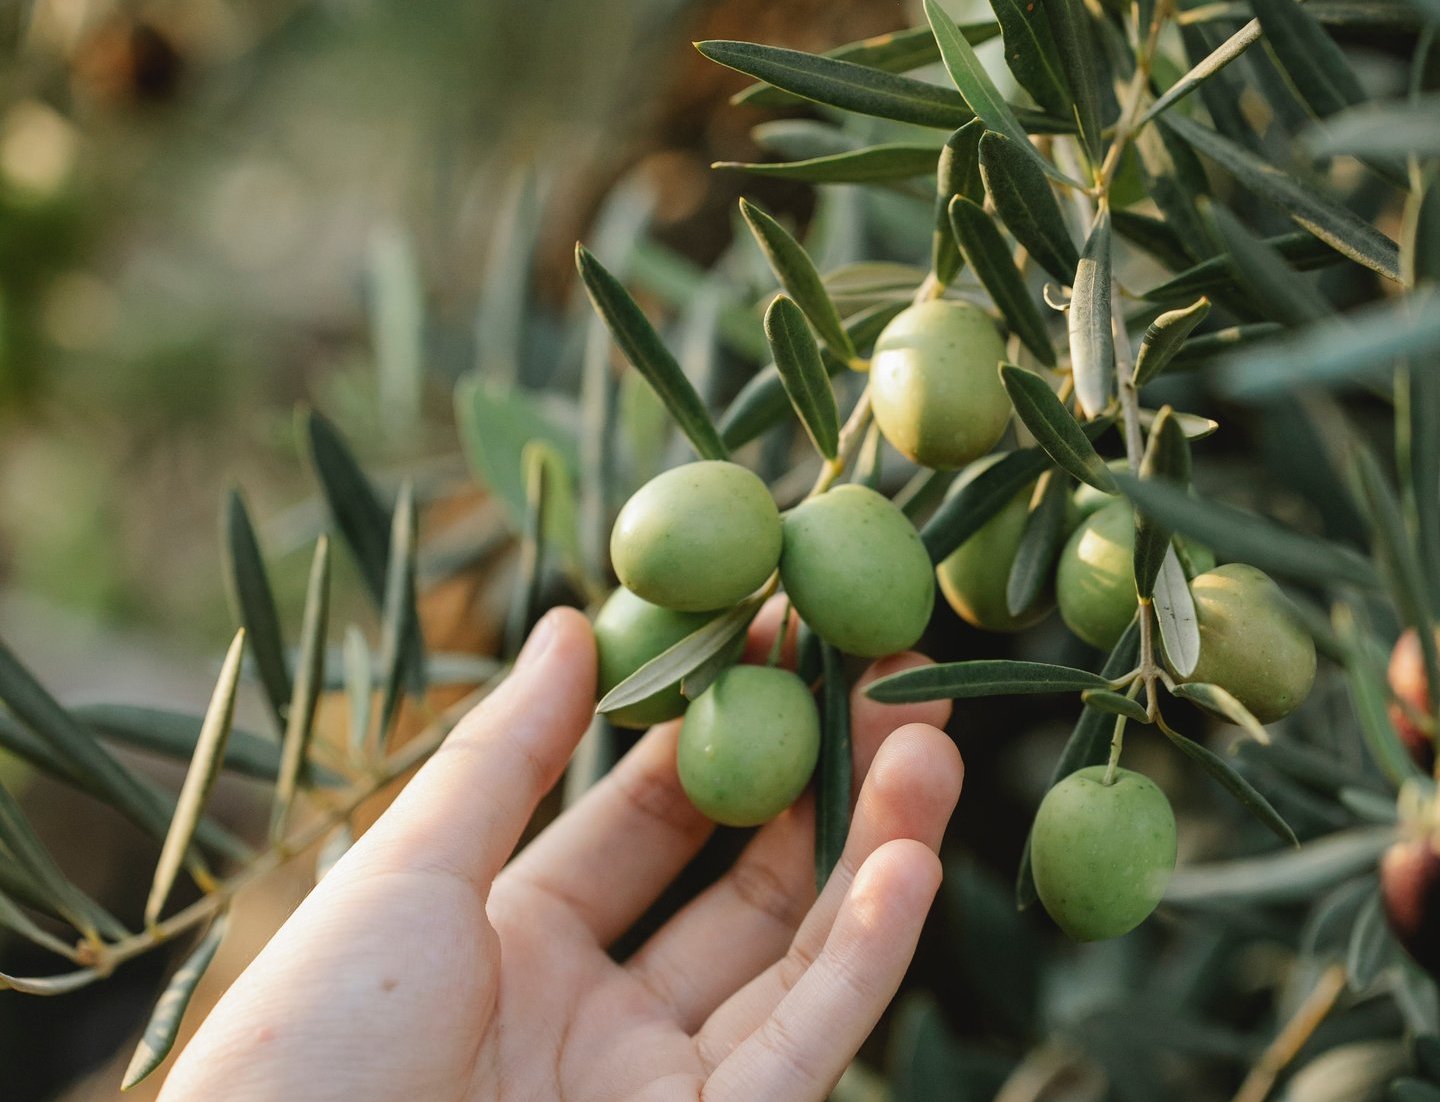 Picking fresh olives off an olive tree